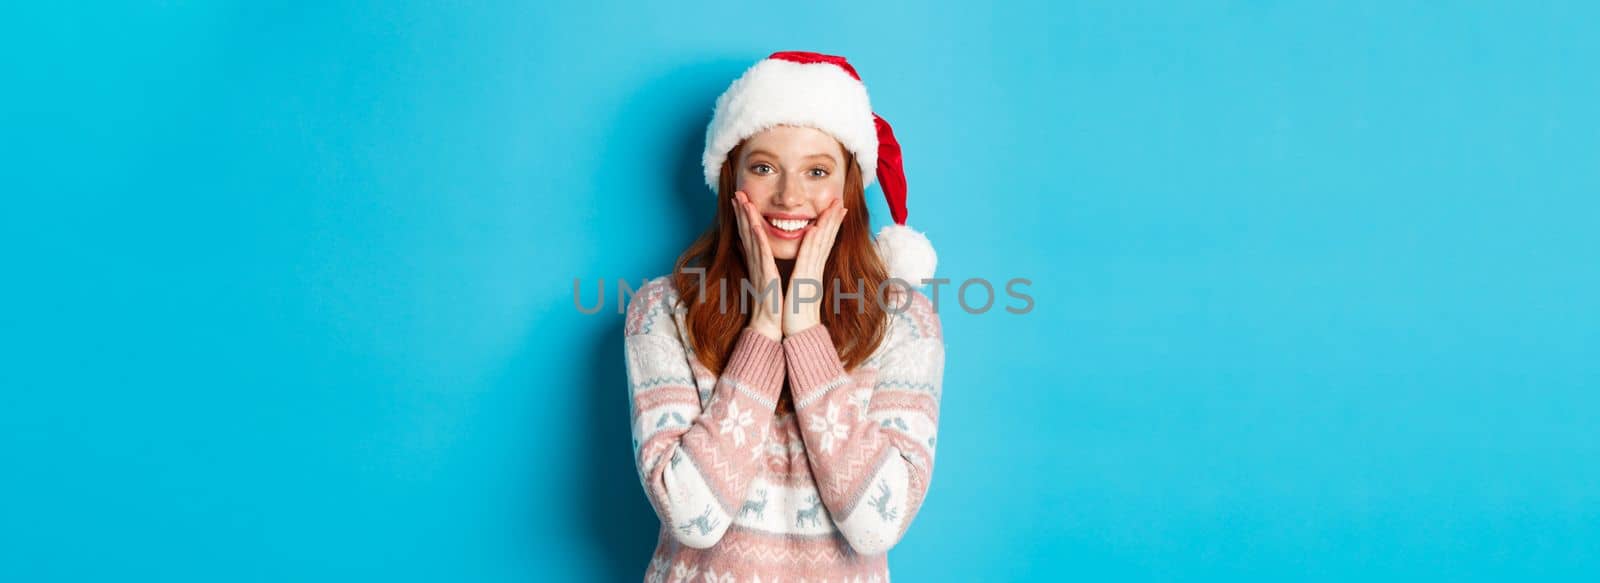 Winter and Christmas Eve concept. Happy redhead girl celebrating xmas, staring at camera amazed, smiling and touching cheeks, standing over blue background.